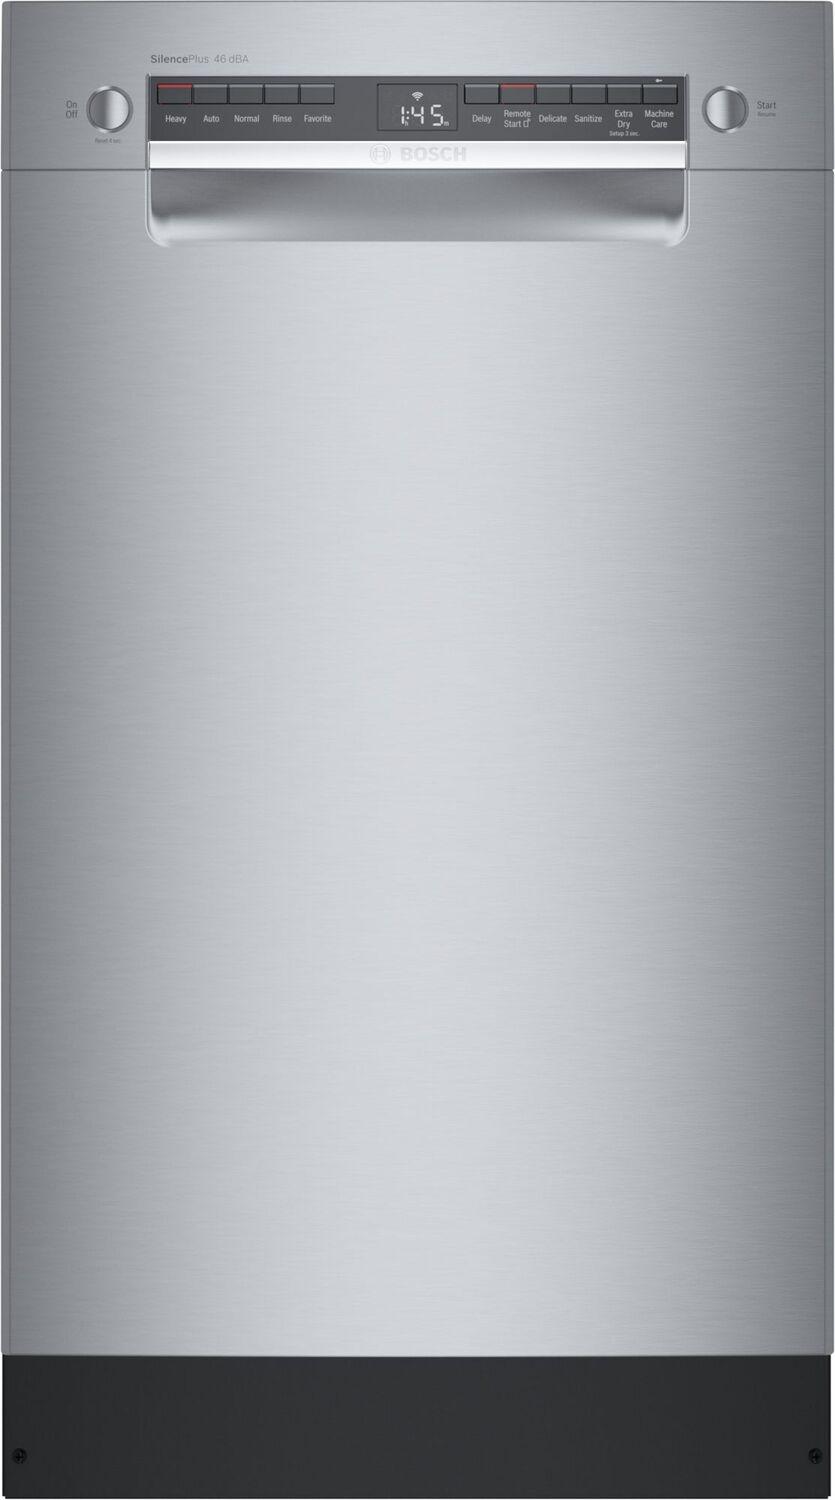 300 Series Dishwasher 17 3/4" Stainless steel SPE53B55UC